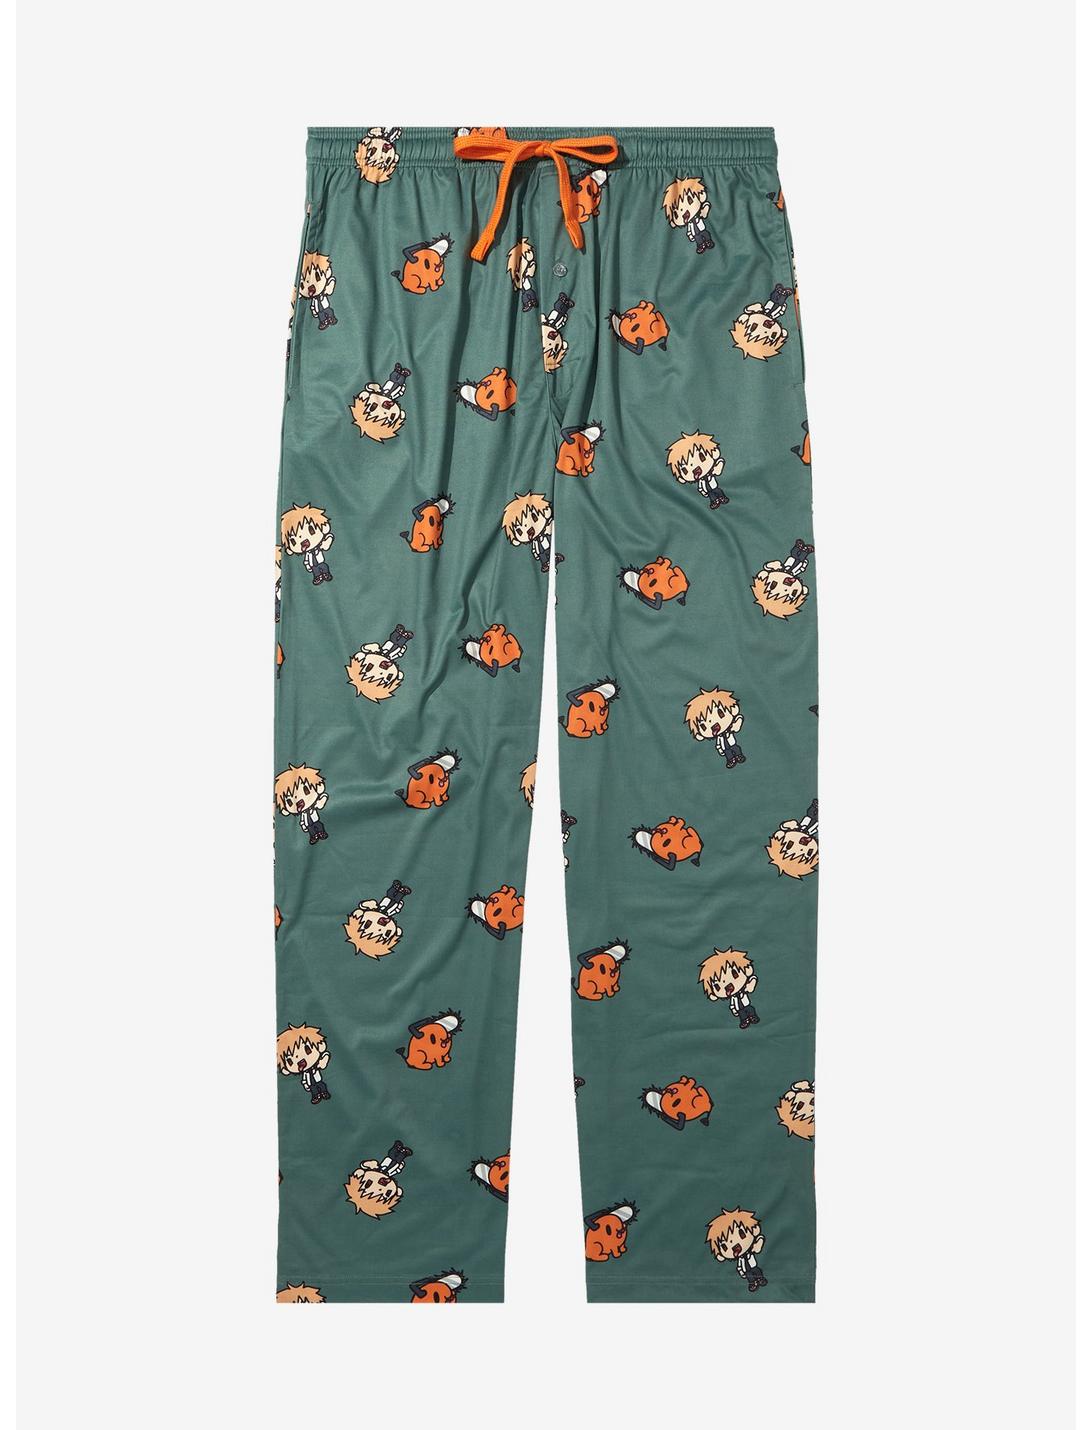 Chainsaw Man Chibi Allover Print Sleep Pants - BoxLunch Exclusive , ARMY GREEN, hi-res